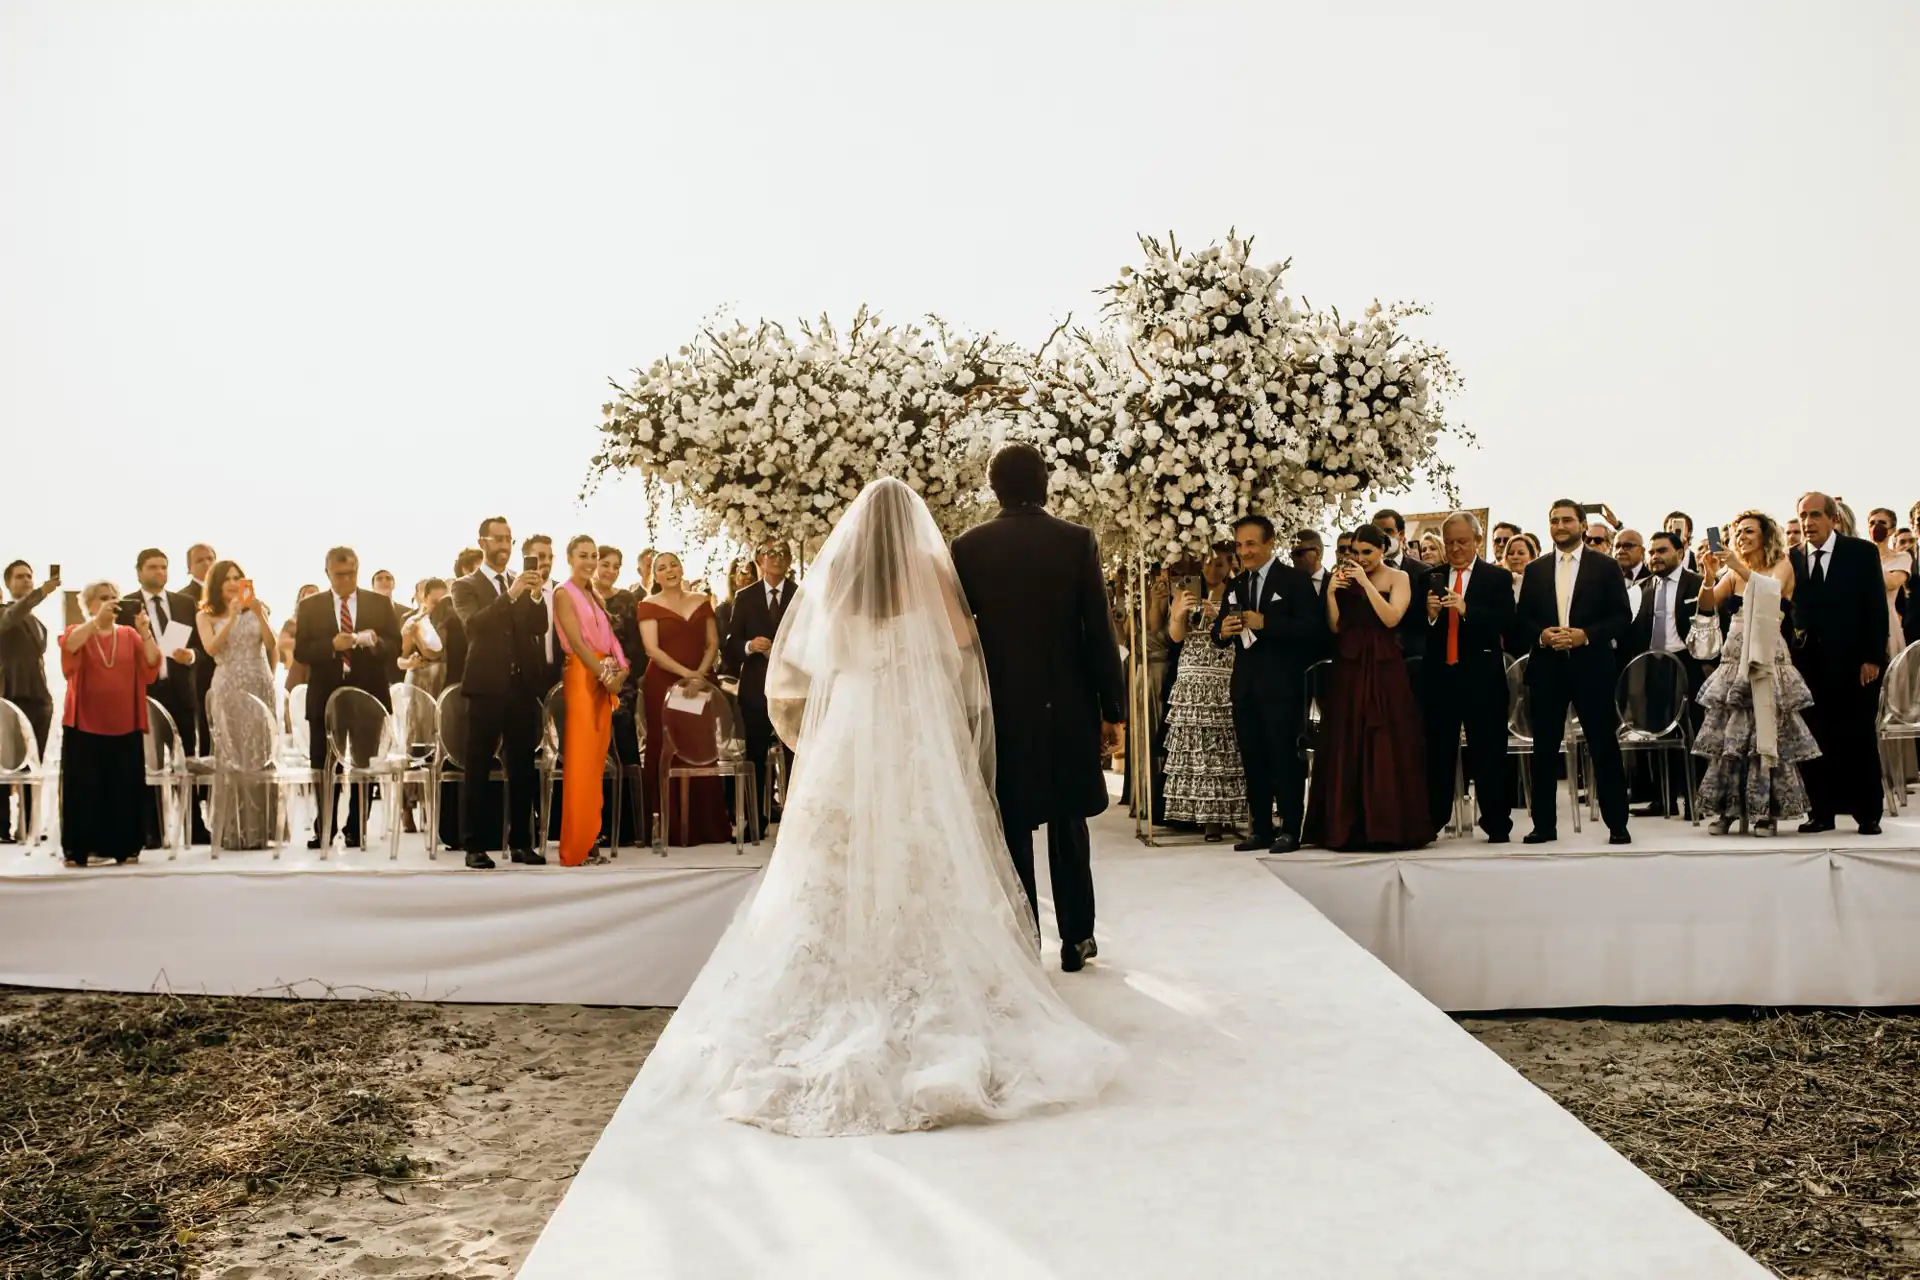 Guests capture moments as witnesses to the bride and groom's wedding ceremony.